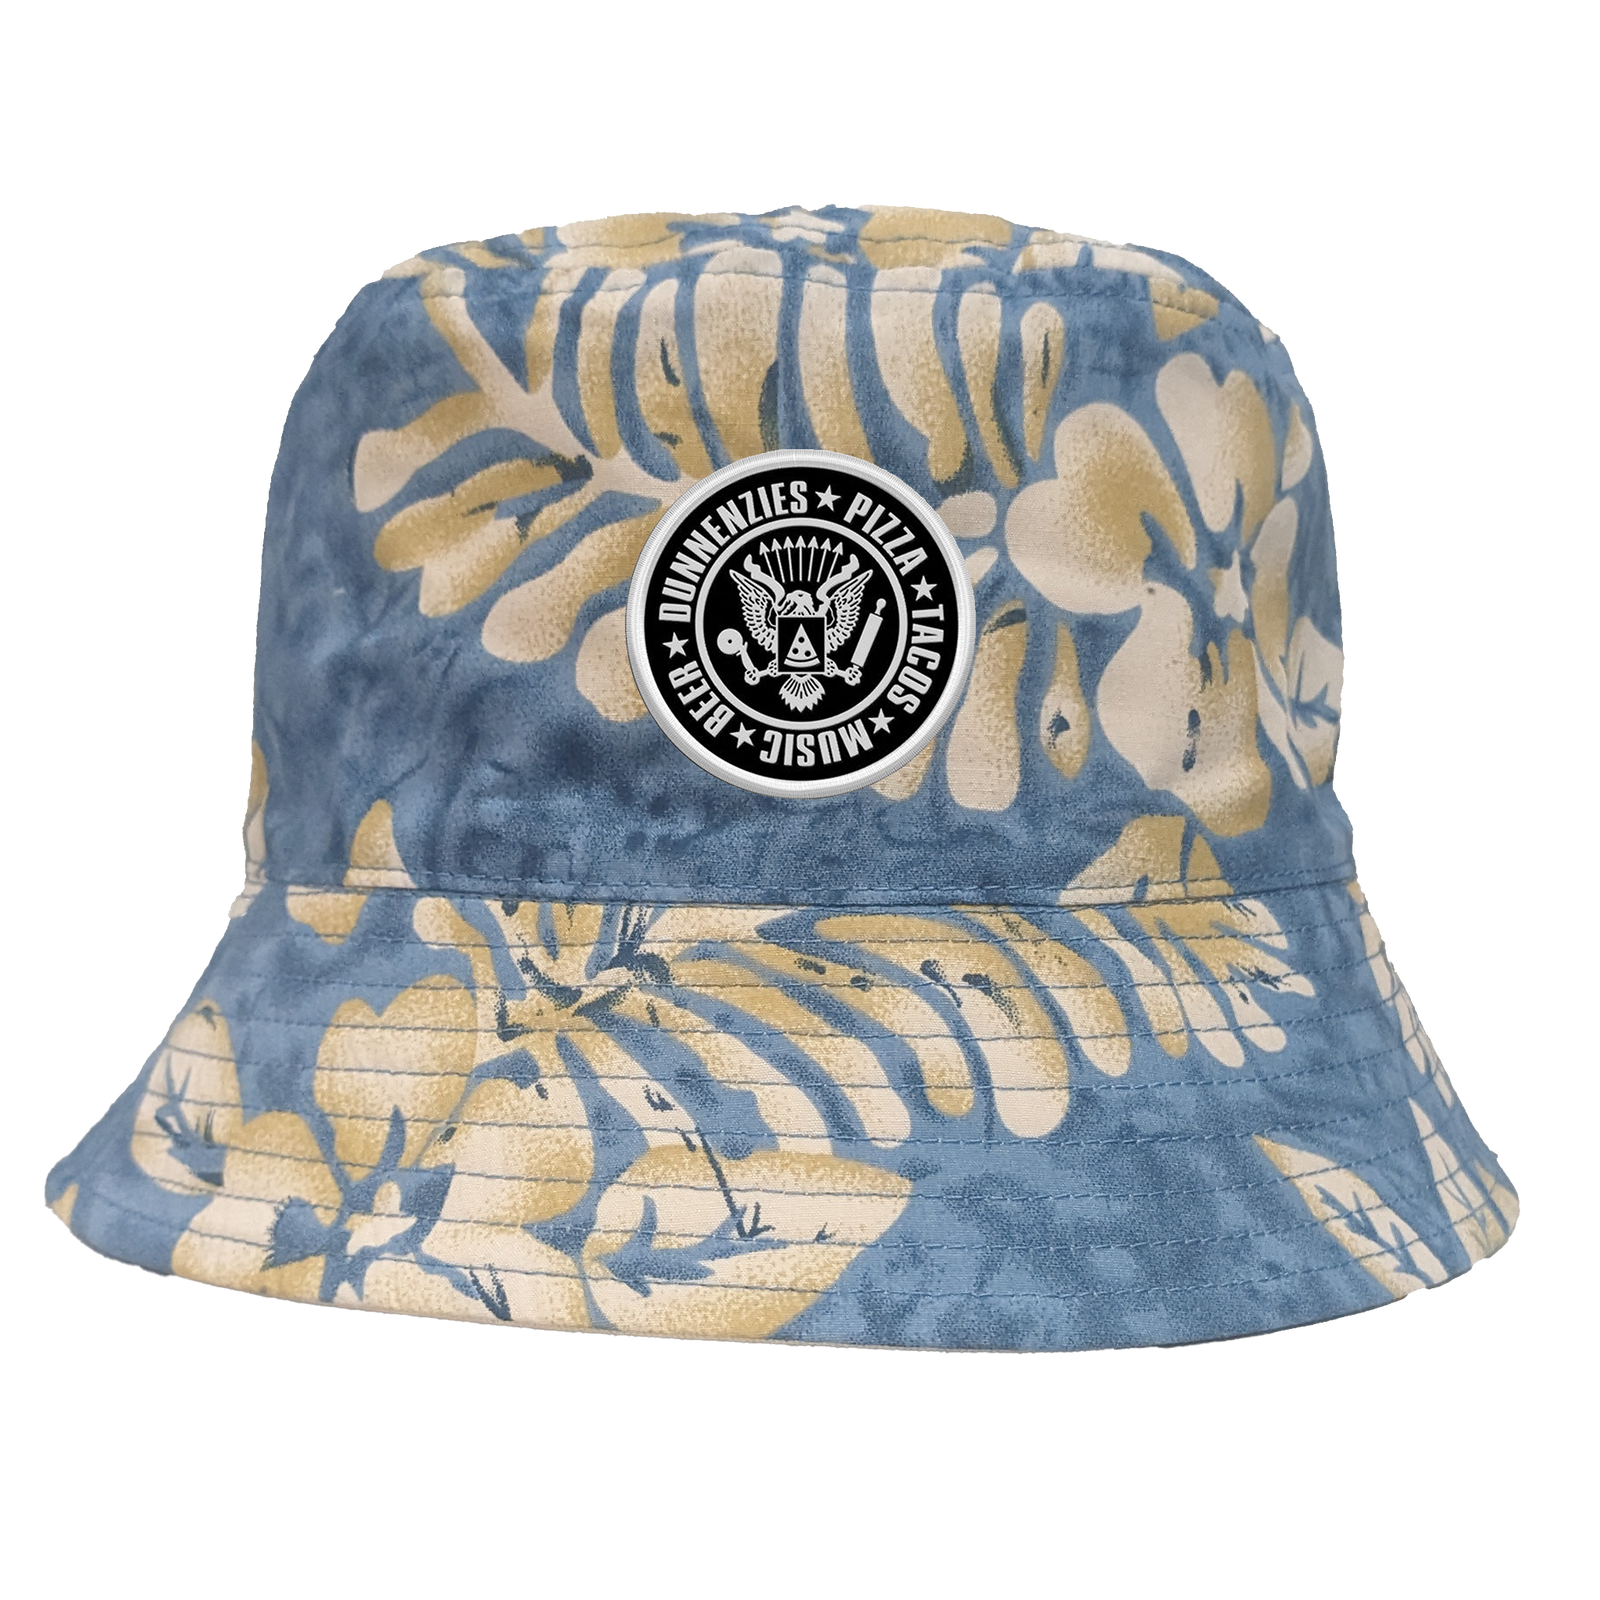 Dunnenzies Bucket Hat - Adult Unisex One Size Fits All - Floral Reversible